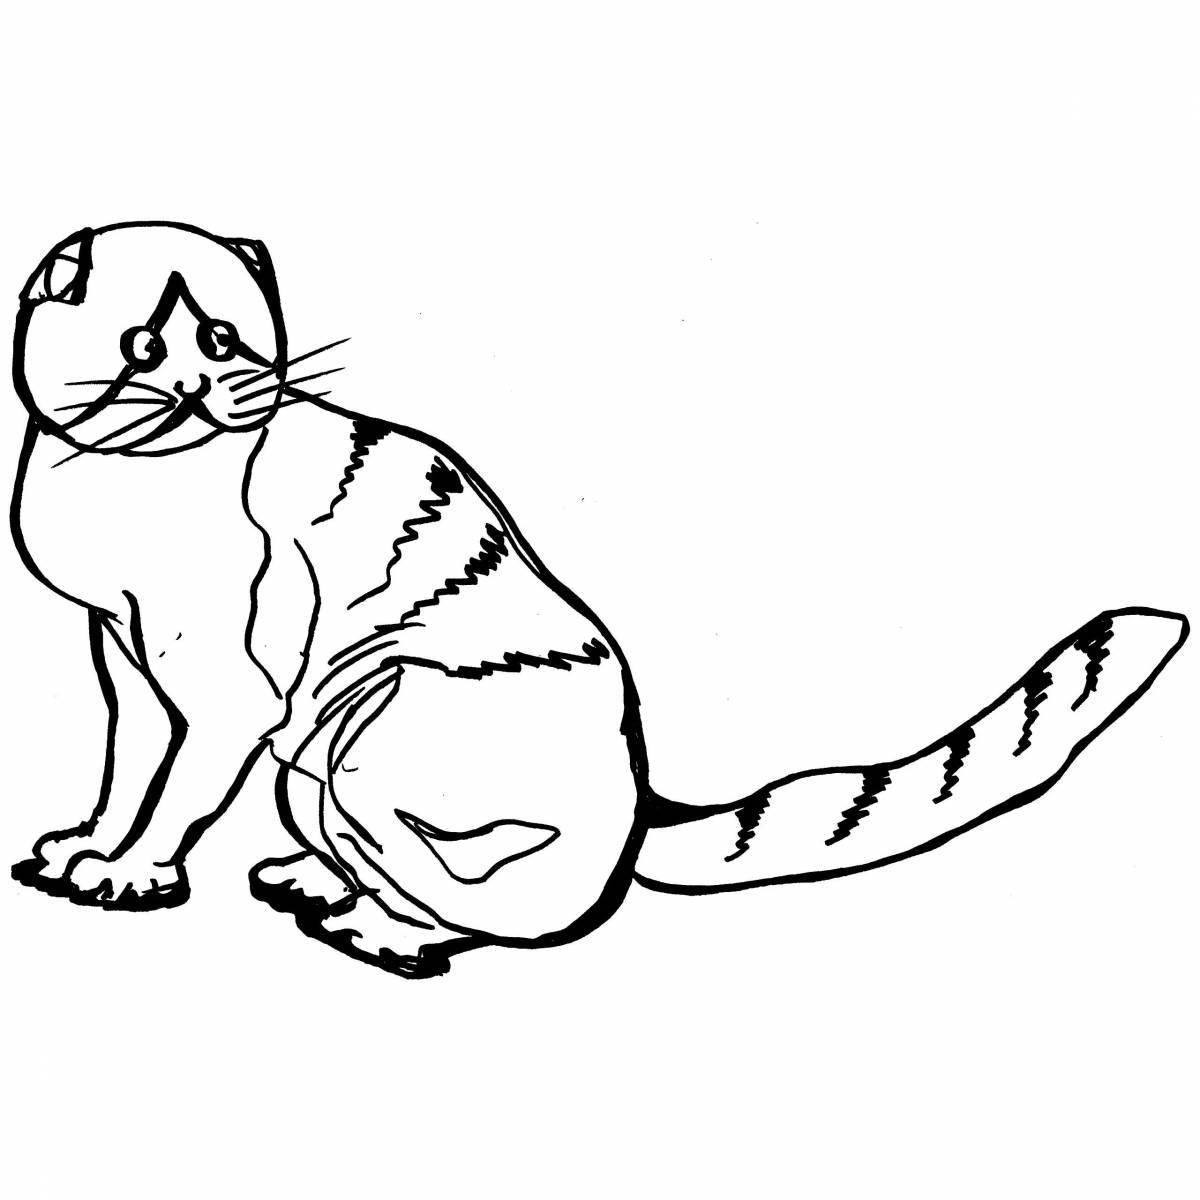 Colourful fold cat coloring page